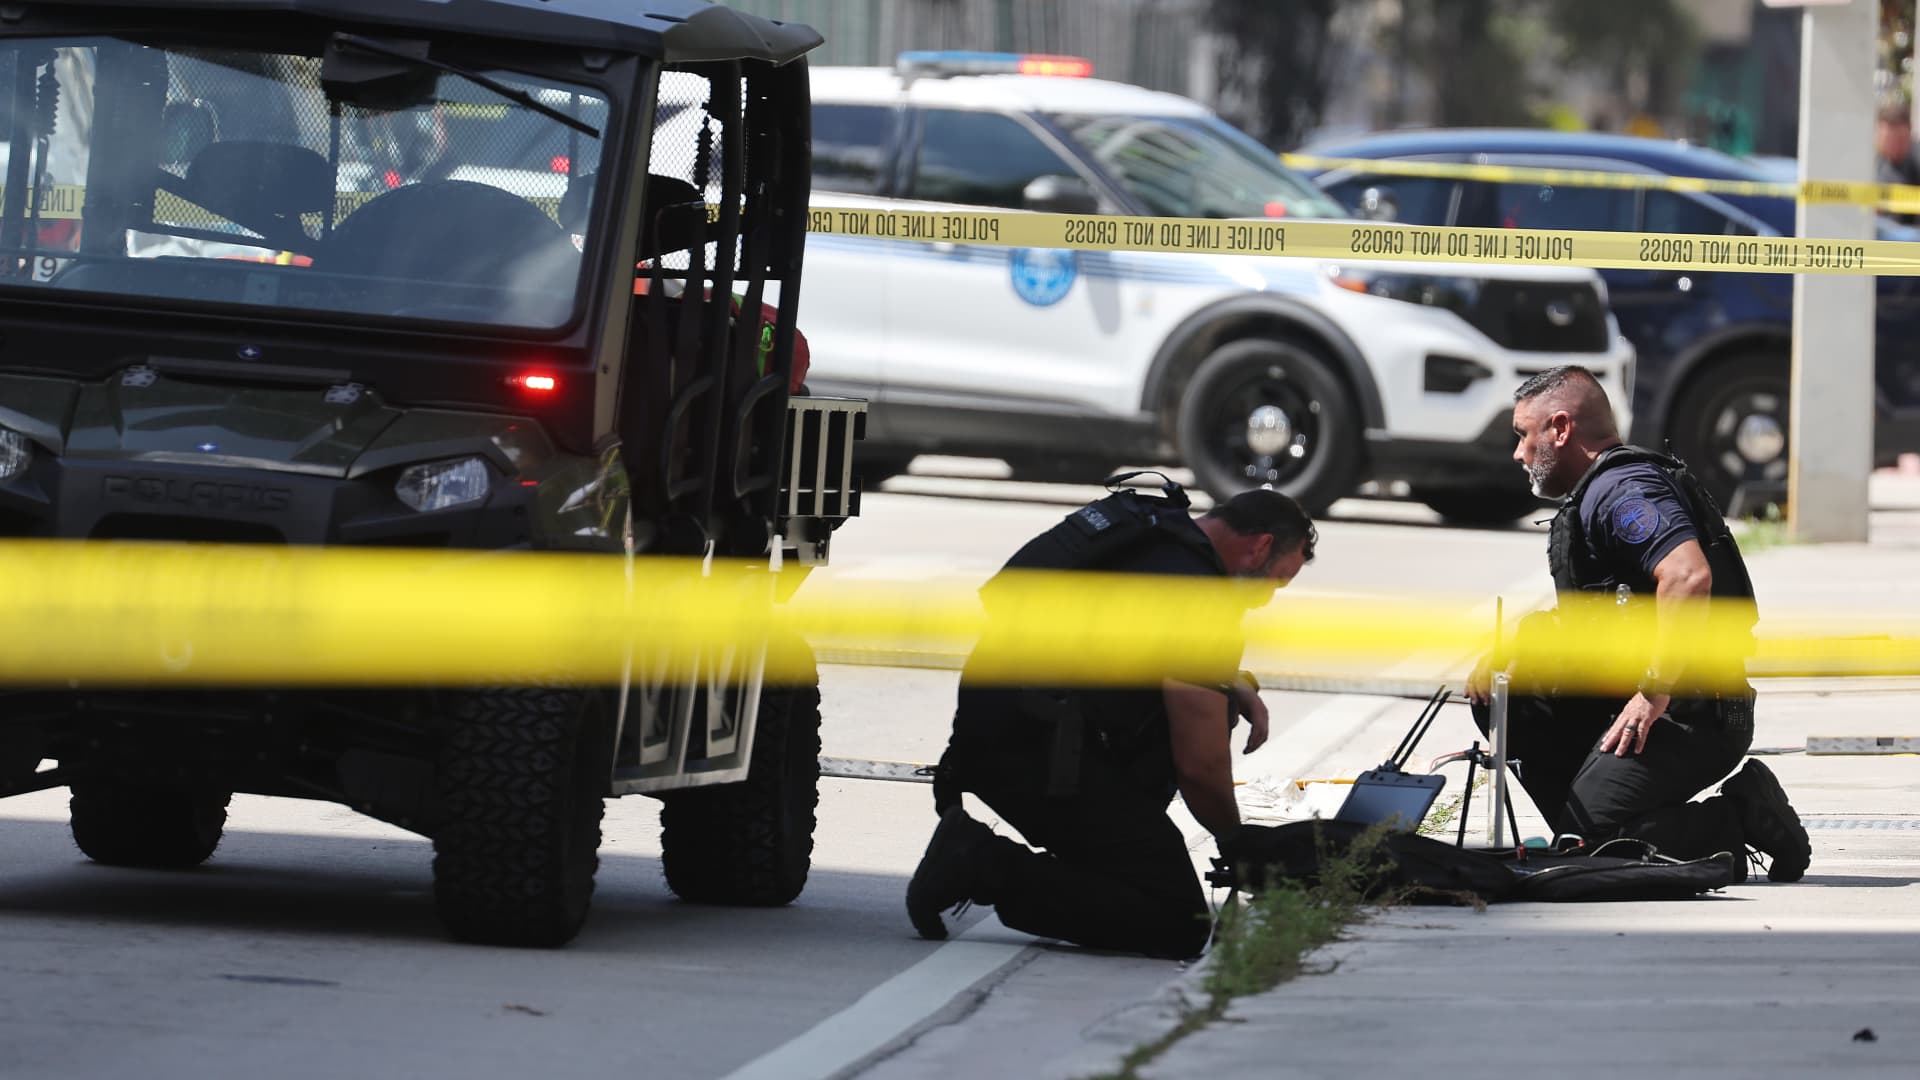 Miami Police investigate a suspicious package near the media area outside the Wilkie D. Ferguson Jr. United States Federal Courthouse where former President Donald Trump is scheduled to be arraigned later in the day on June 13, 2023 in Miami, Florida.